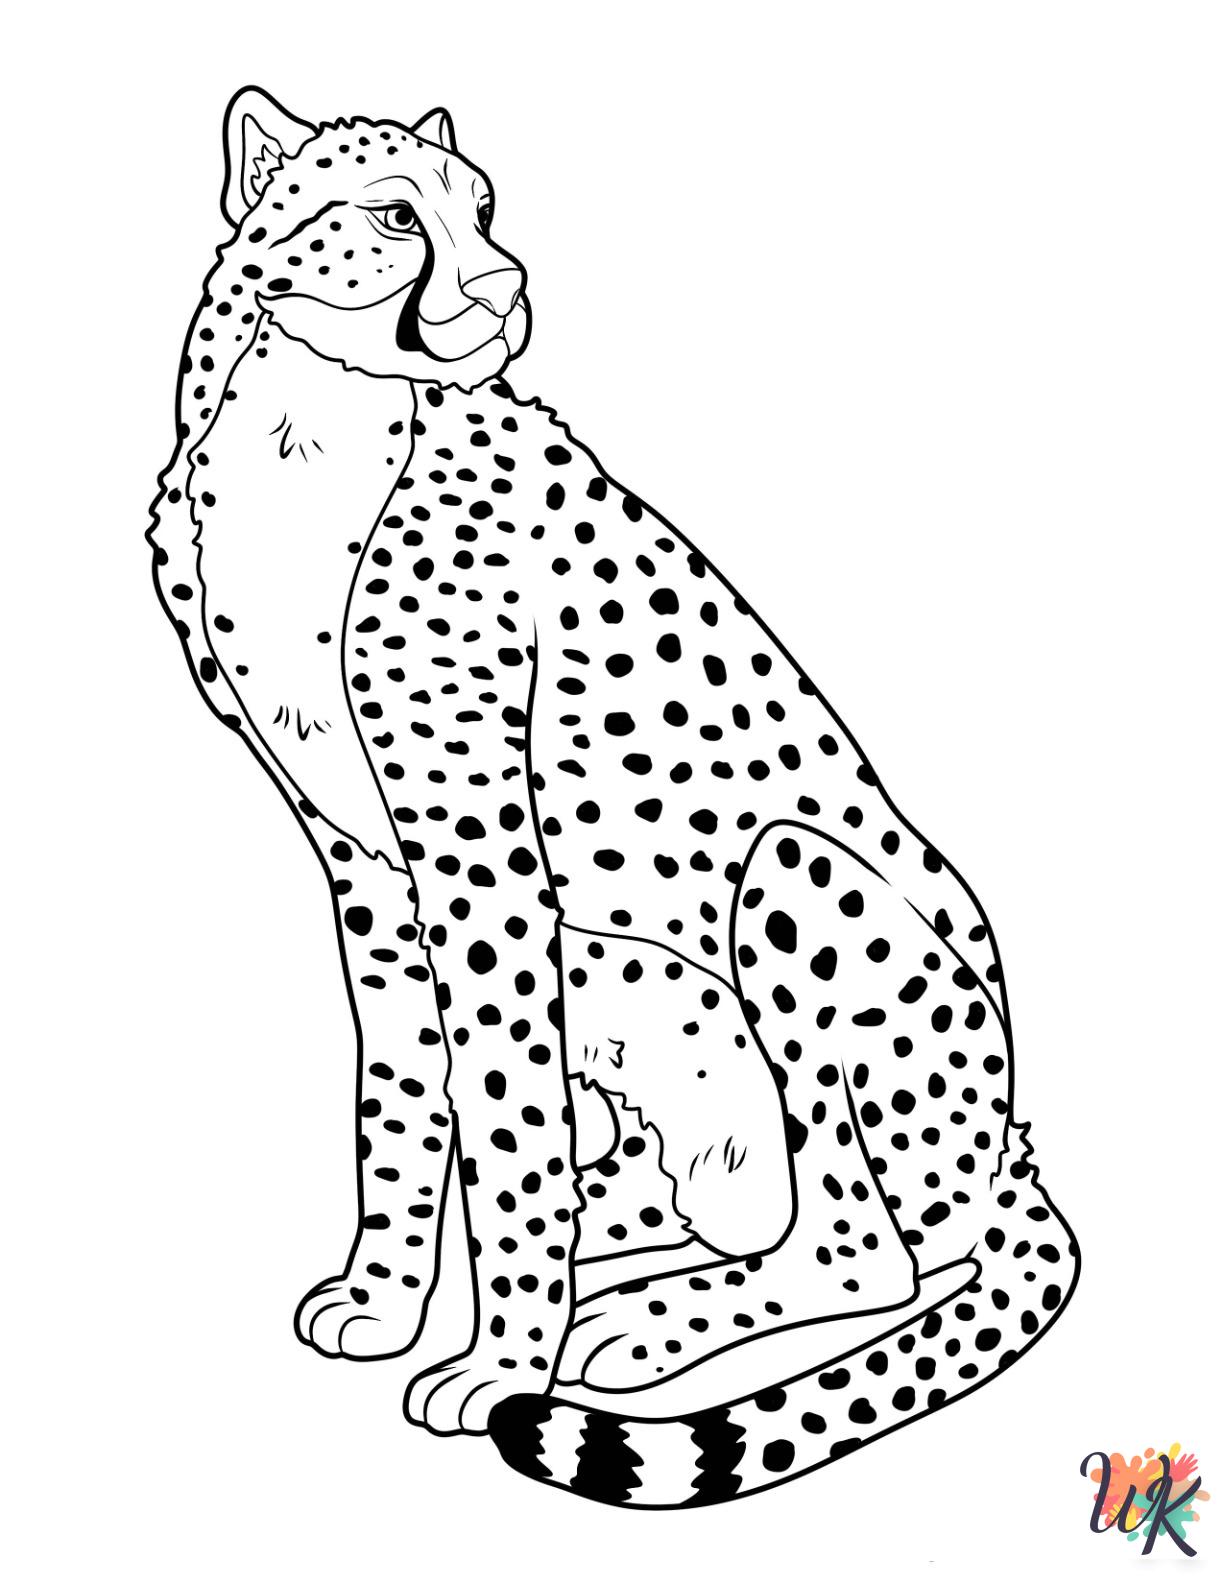 Cheetah coloring pages for preschoolers